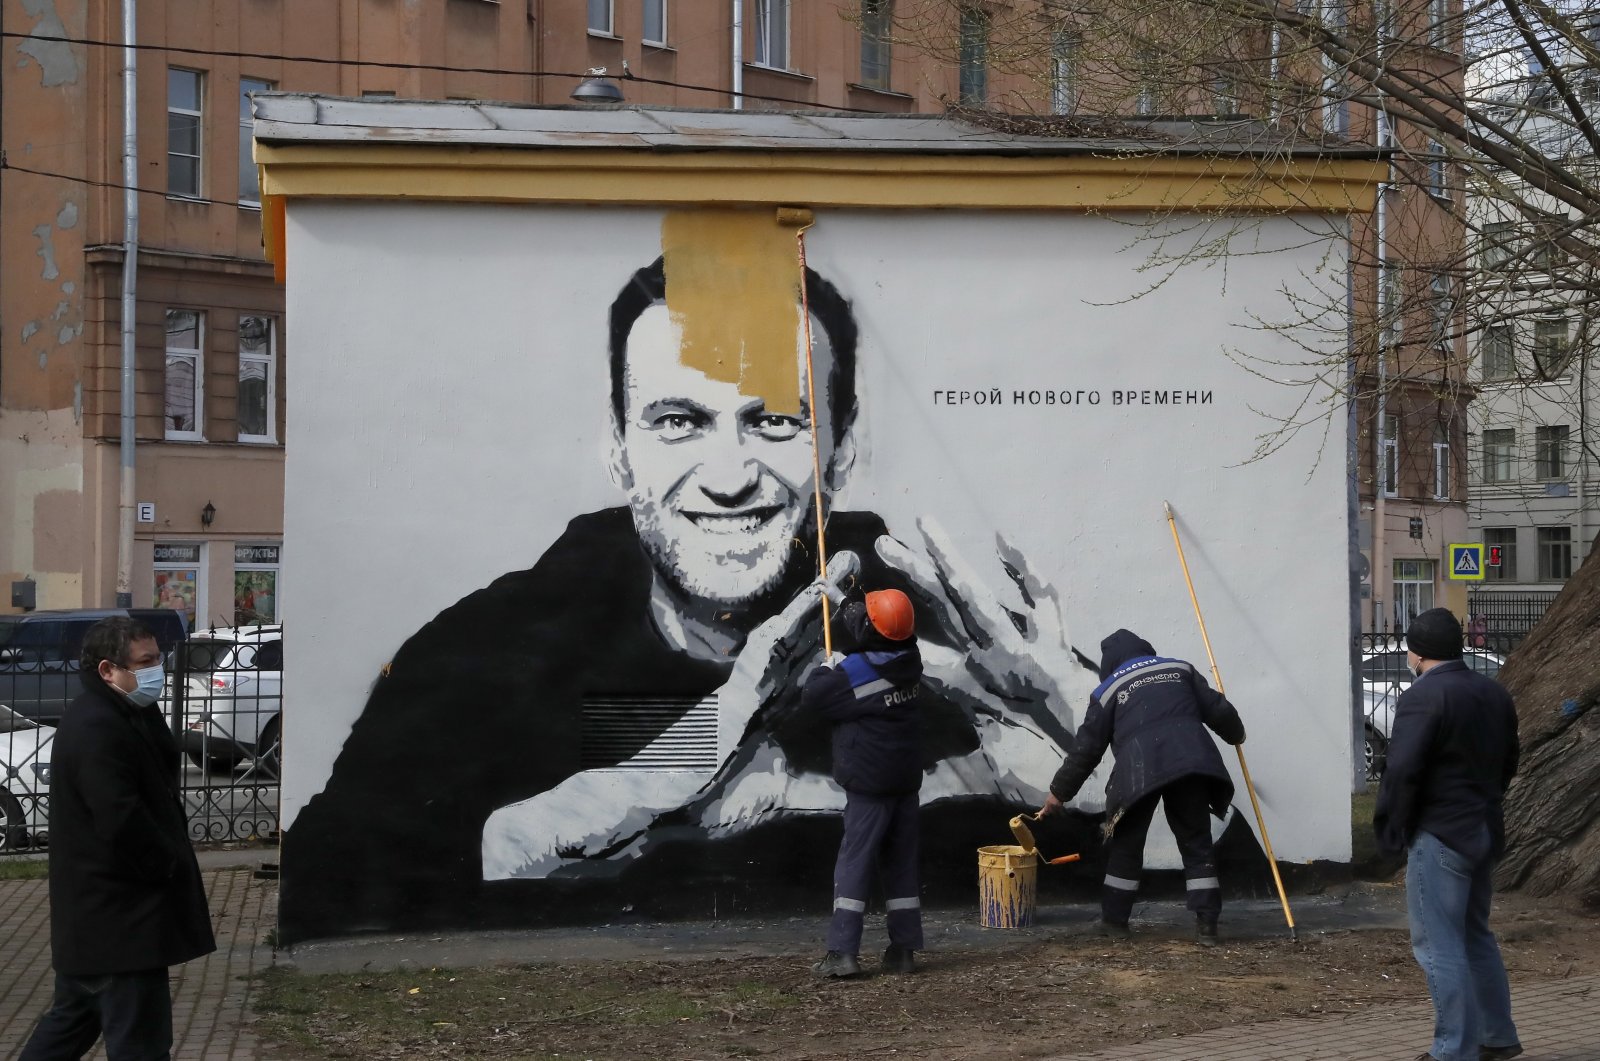 Municipal workers paint over graffiti depicting jailed Russian opposition politician Alexei Navalny that reads, "The hero of the new age," in St. Petersburg, Russia, April 28, 2021. (EPA Photo)